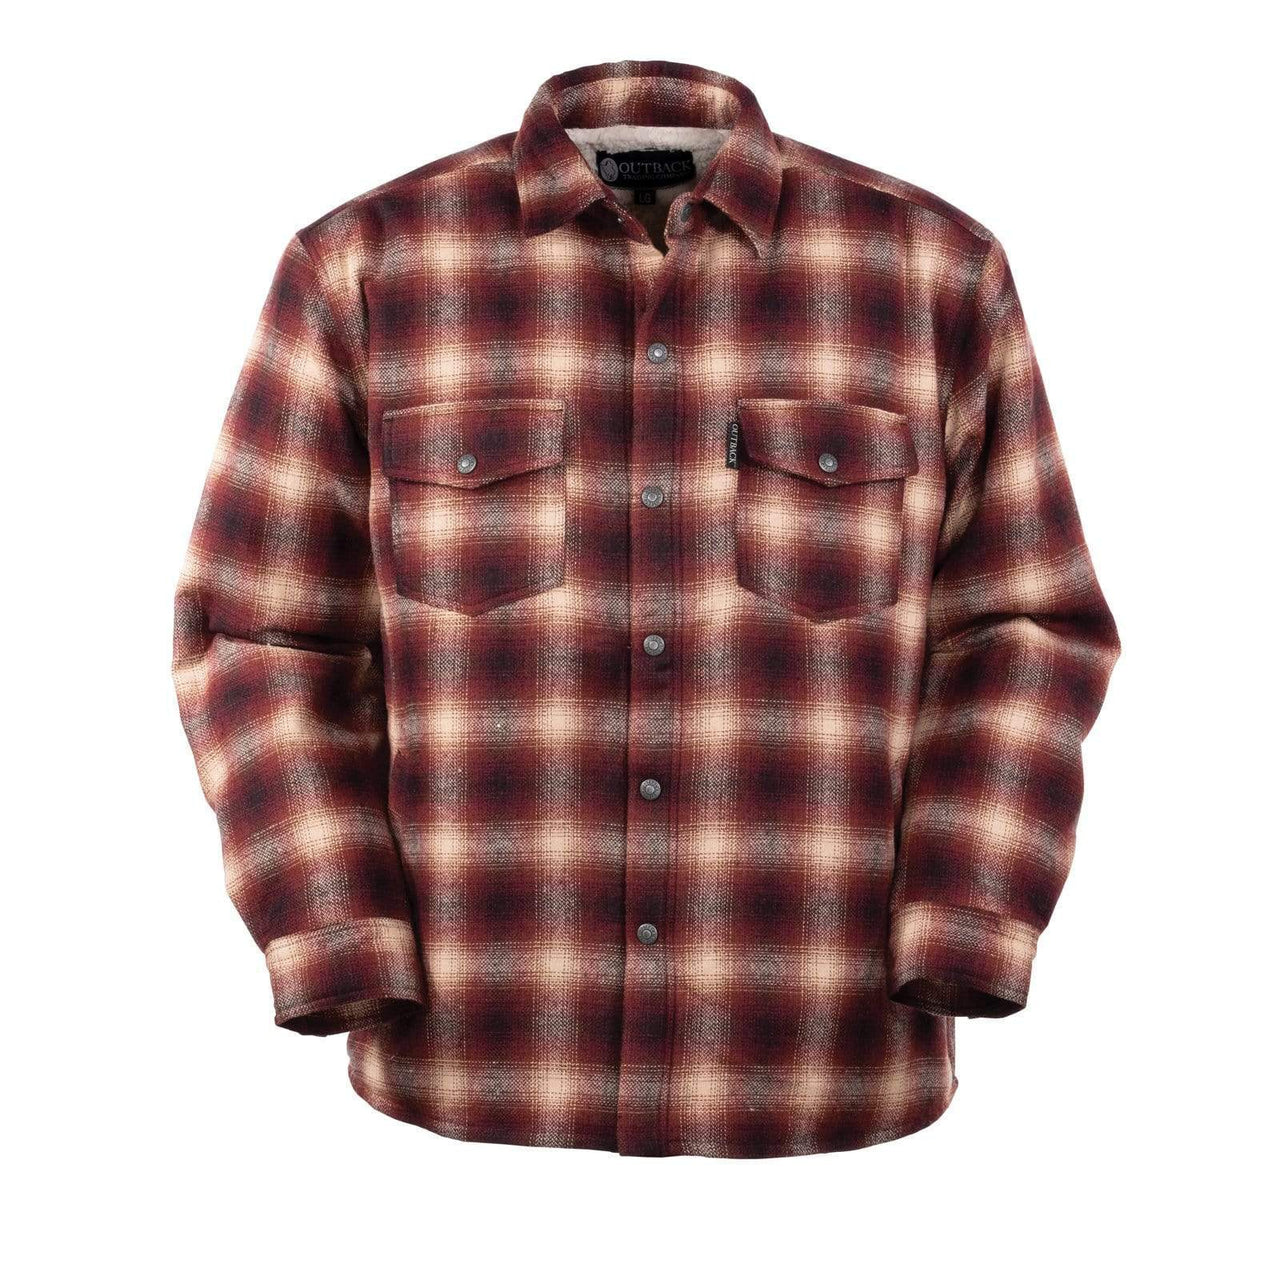 Outback Trading Arden Jacket